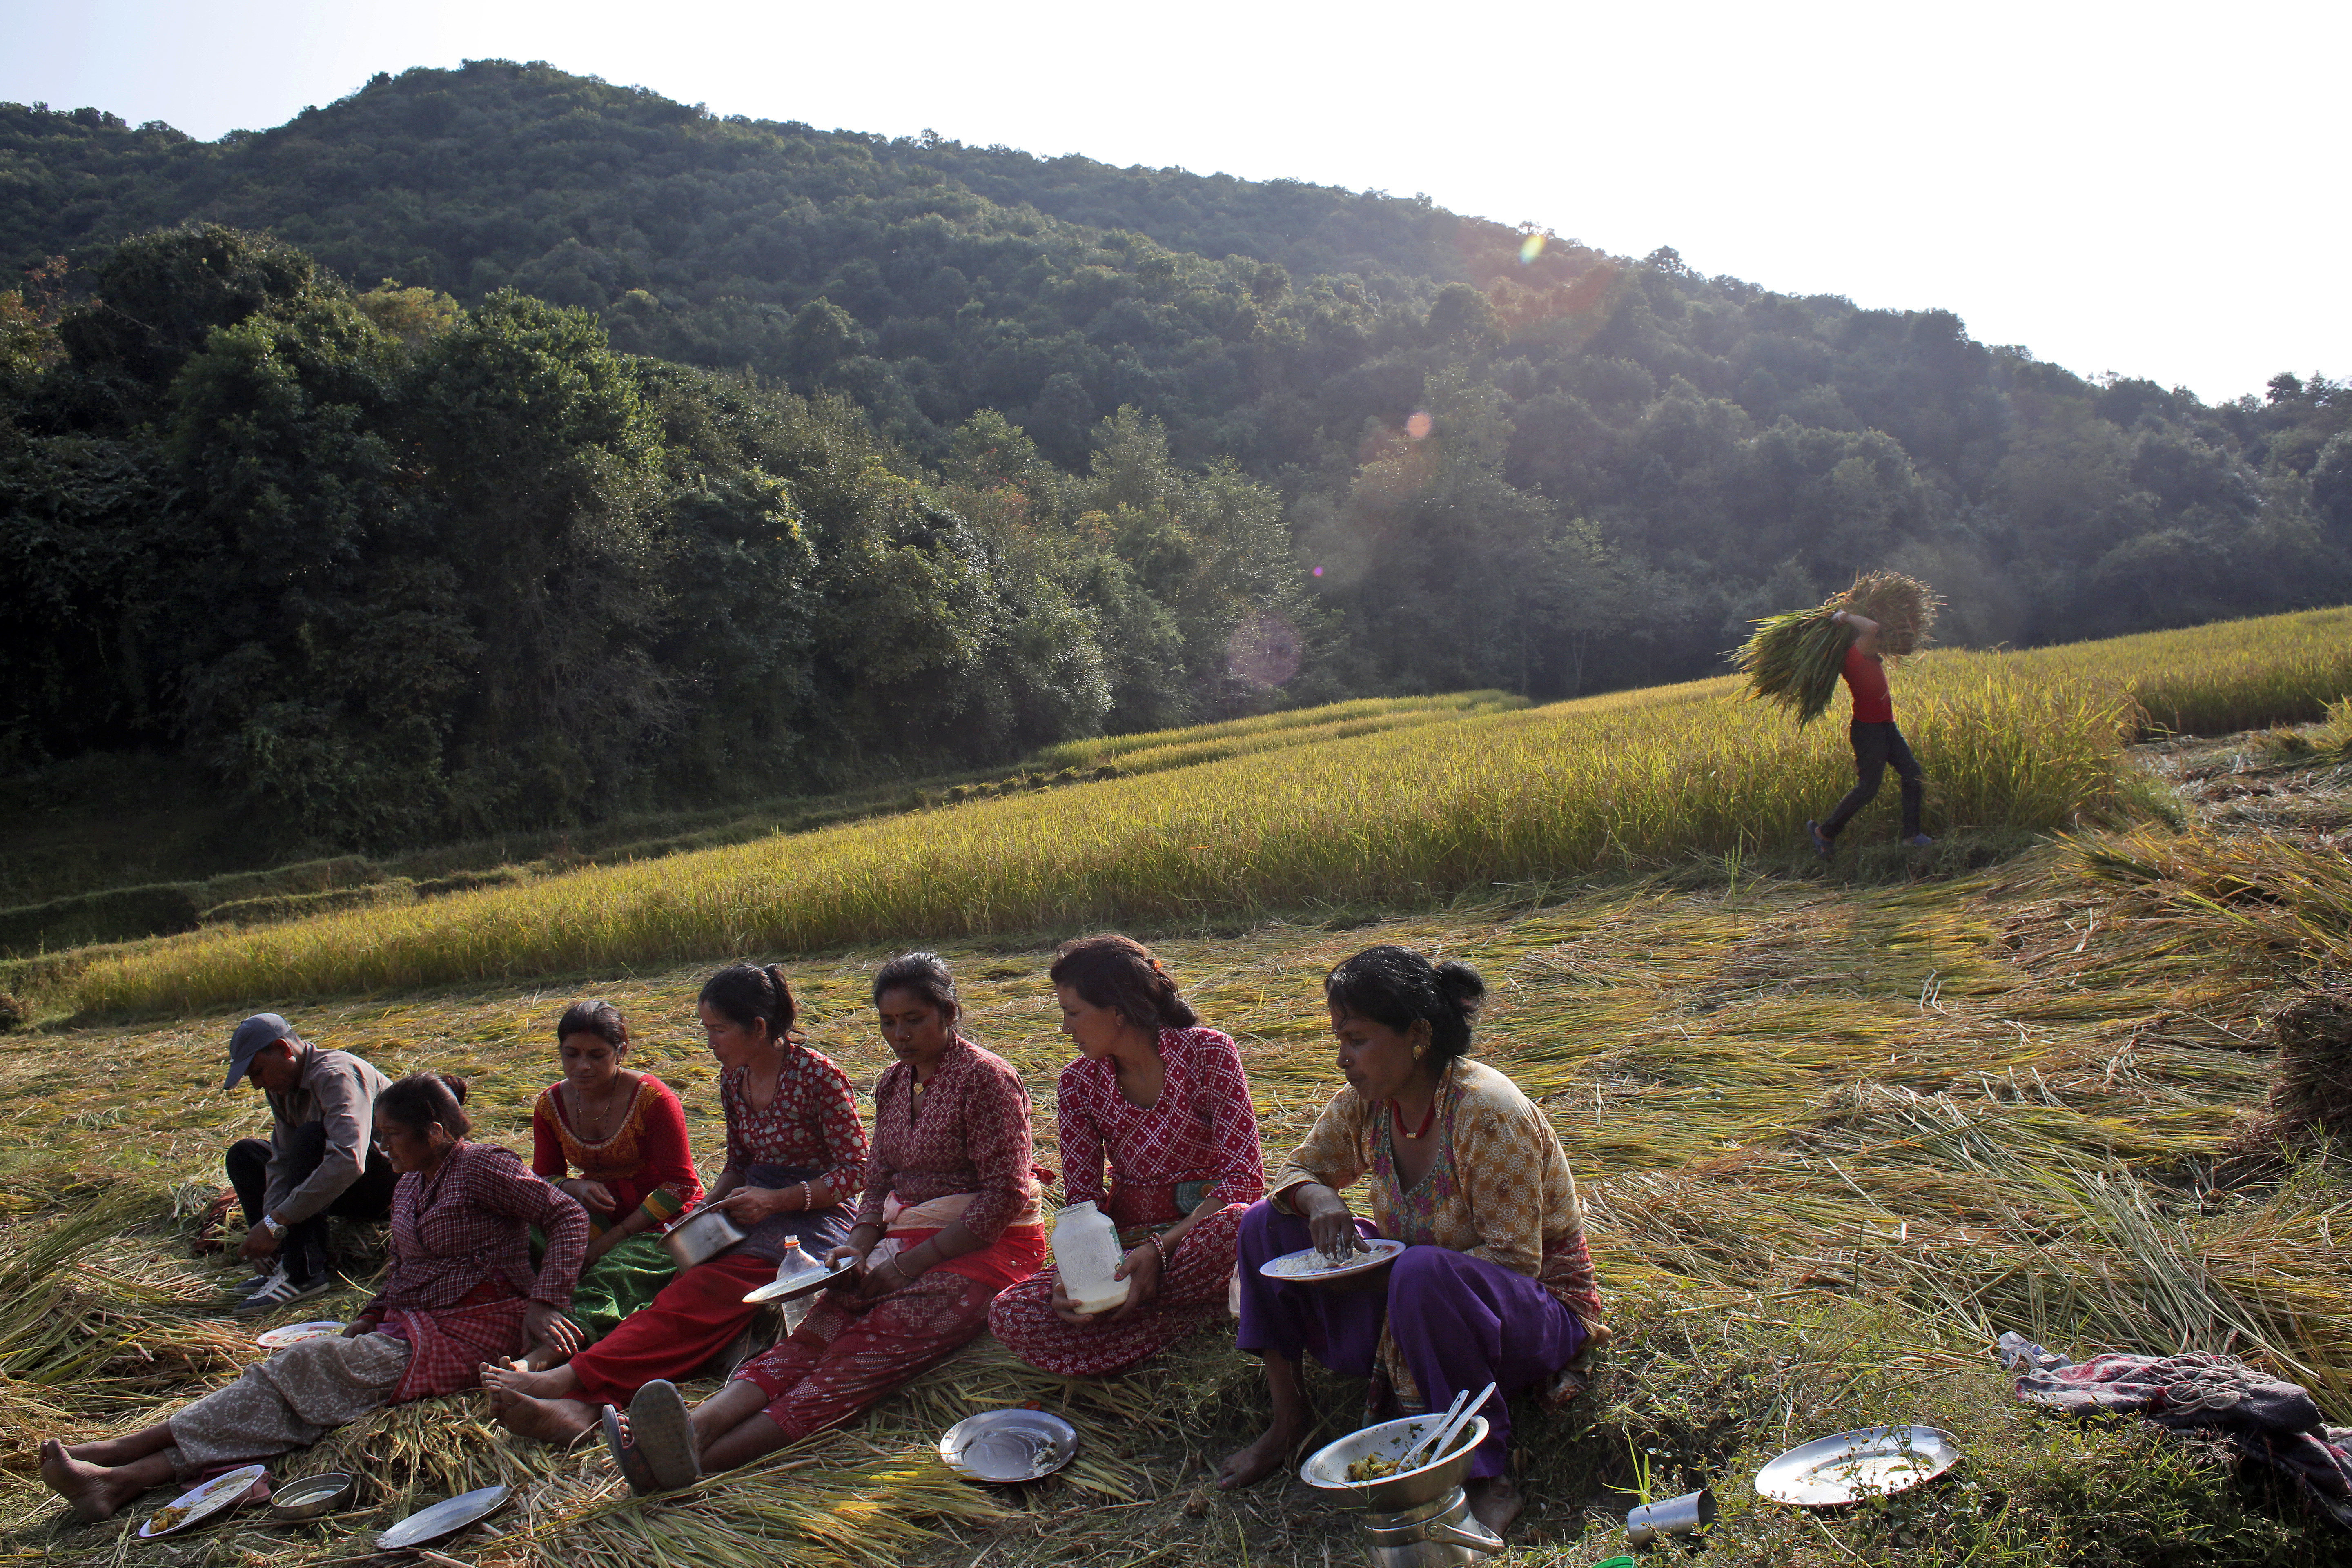 Nepalese farmers take a lunch break while harvesting paddy in Chaukot, Kavre District, Nepal, Monday, Oct. 23, 2017. Agriculture is the main source of food, income, and employment for the majority of people in Nepal. (AP Photo/Niranjan Shrestha)